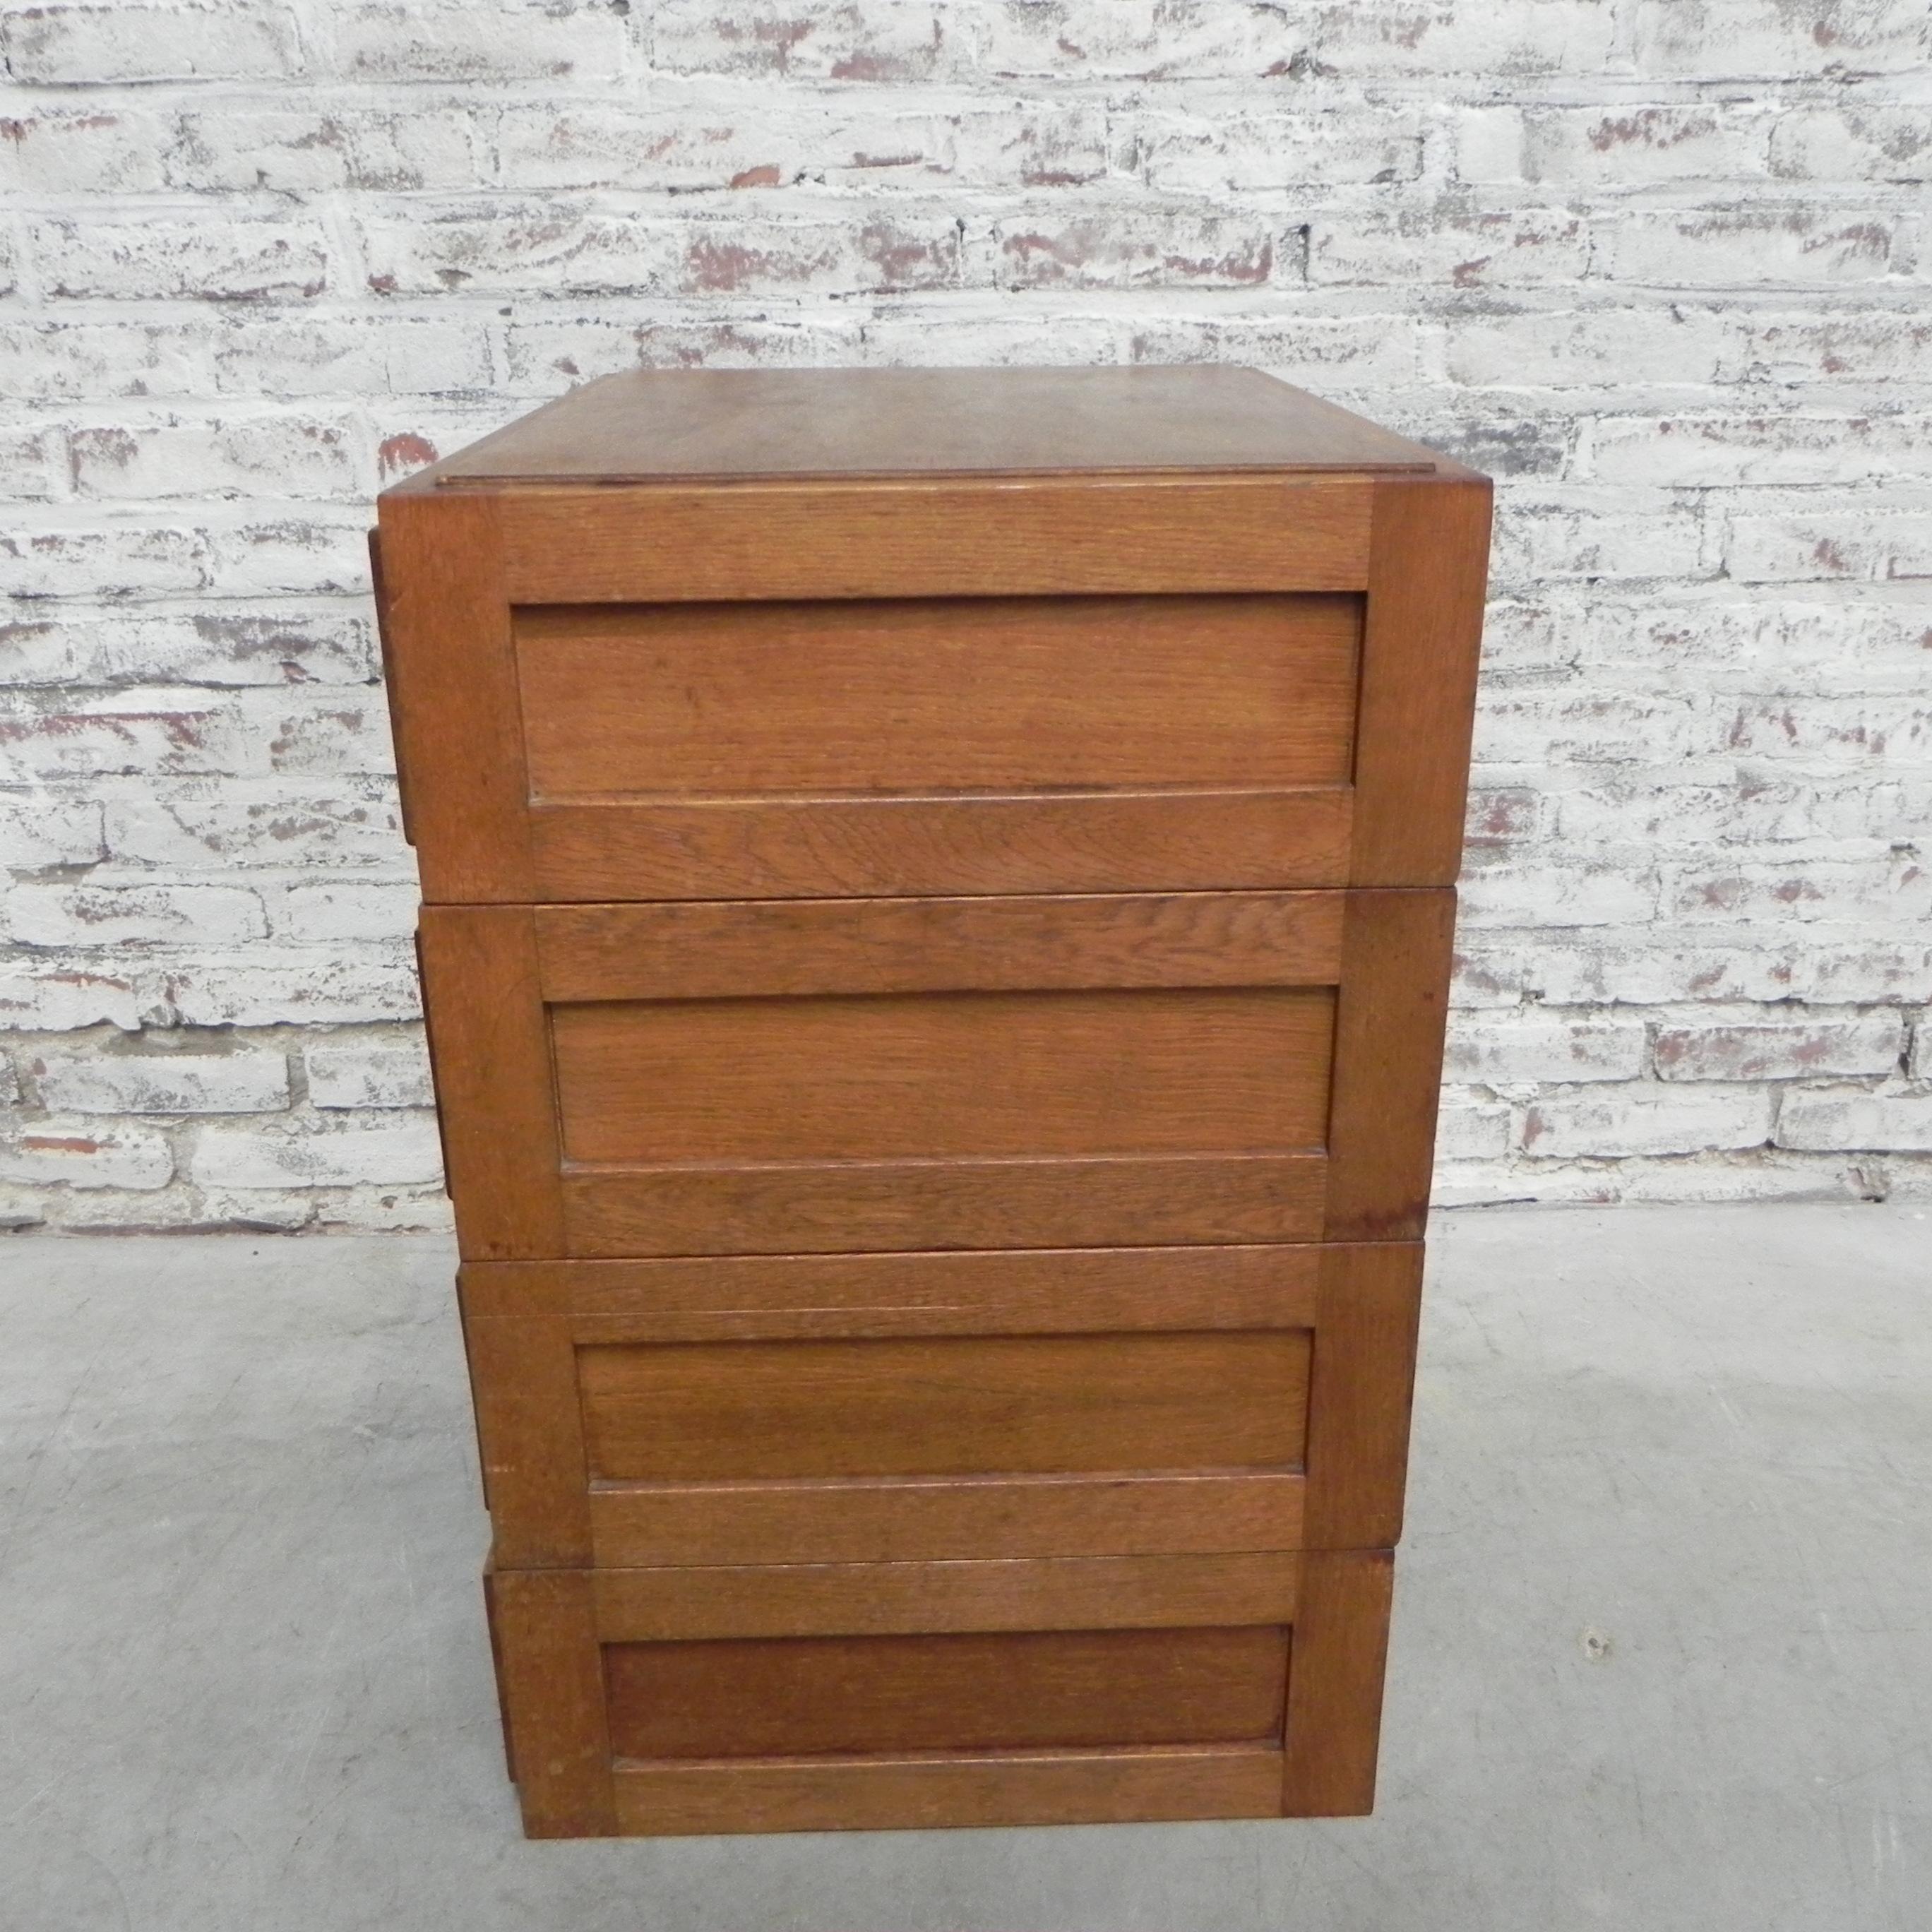 Mid-20th Century Chest of Drawers with 12 Drawers